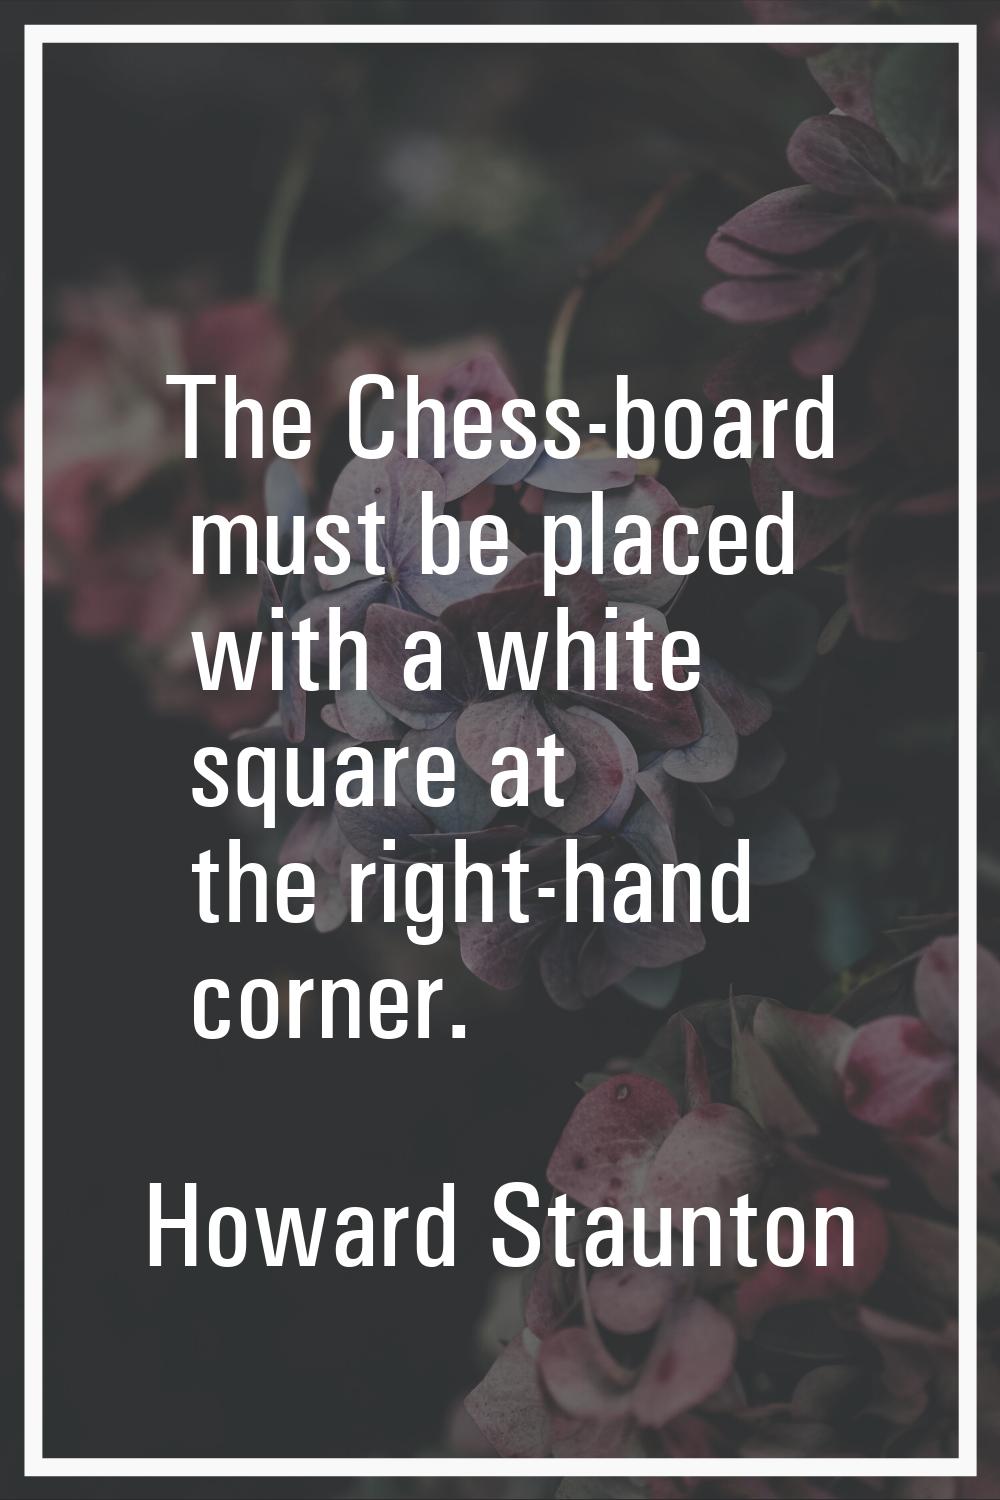 The Chess-board must be placed with a white square at the right-hand corner.